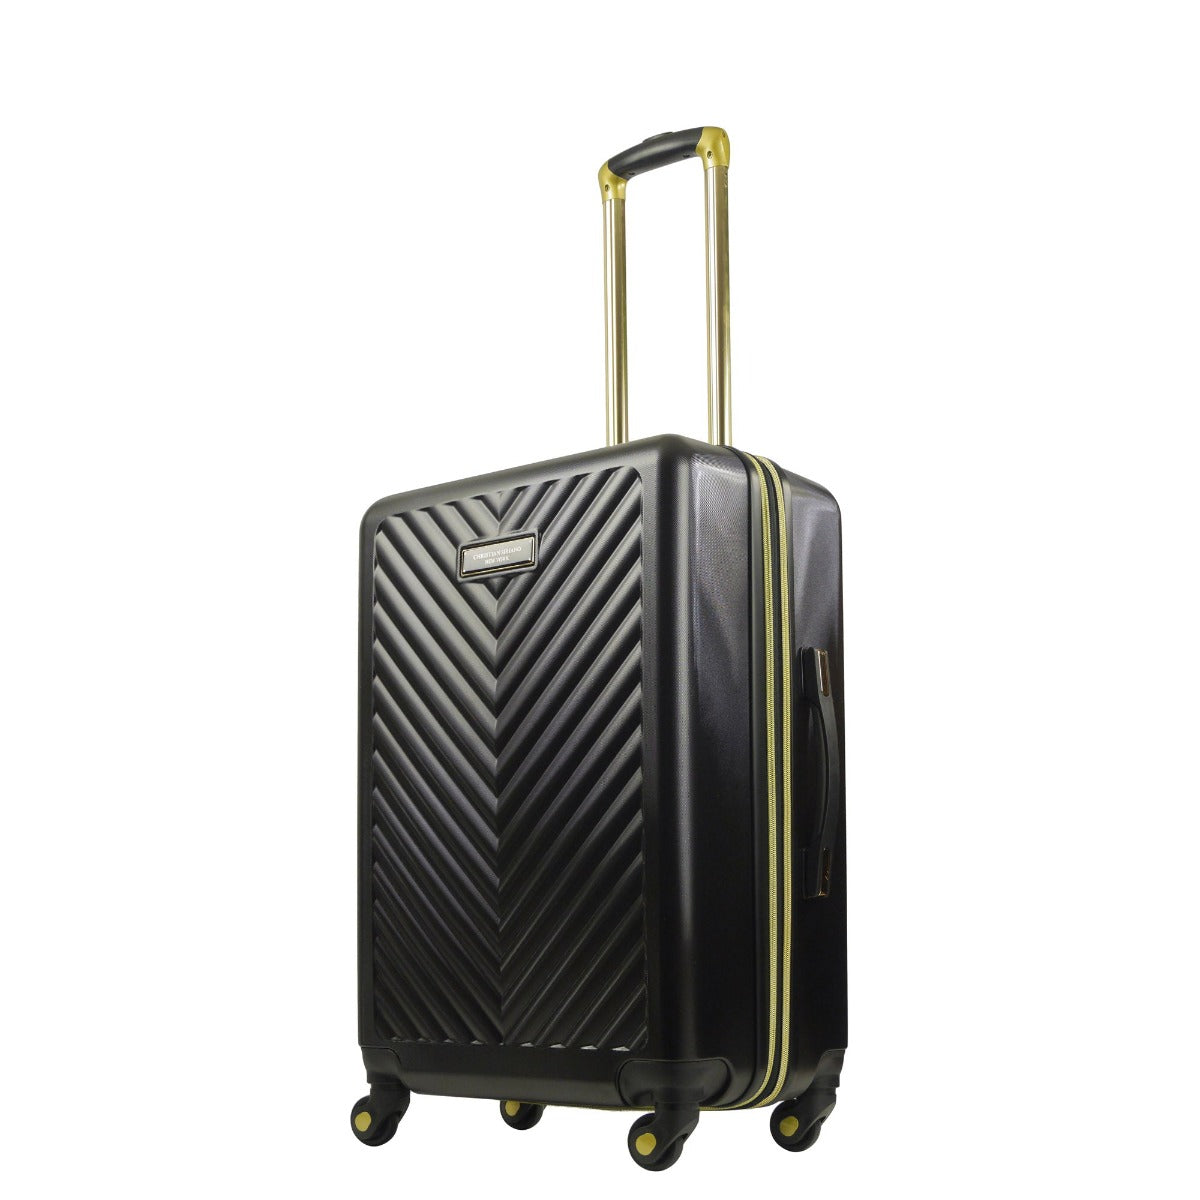 Christian Siriano Addie 25" hardside spinner suitcase checked luggage black - best suitcases for travel